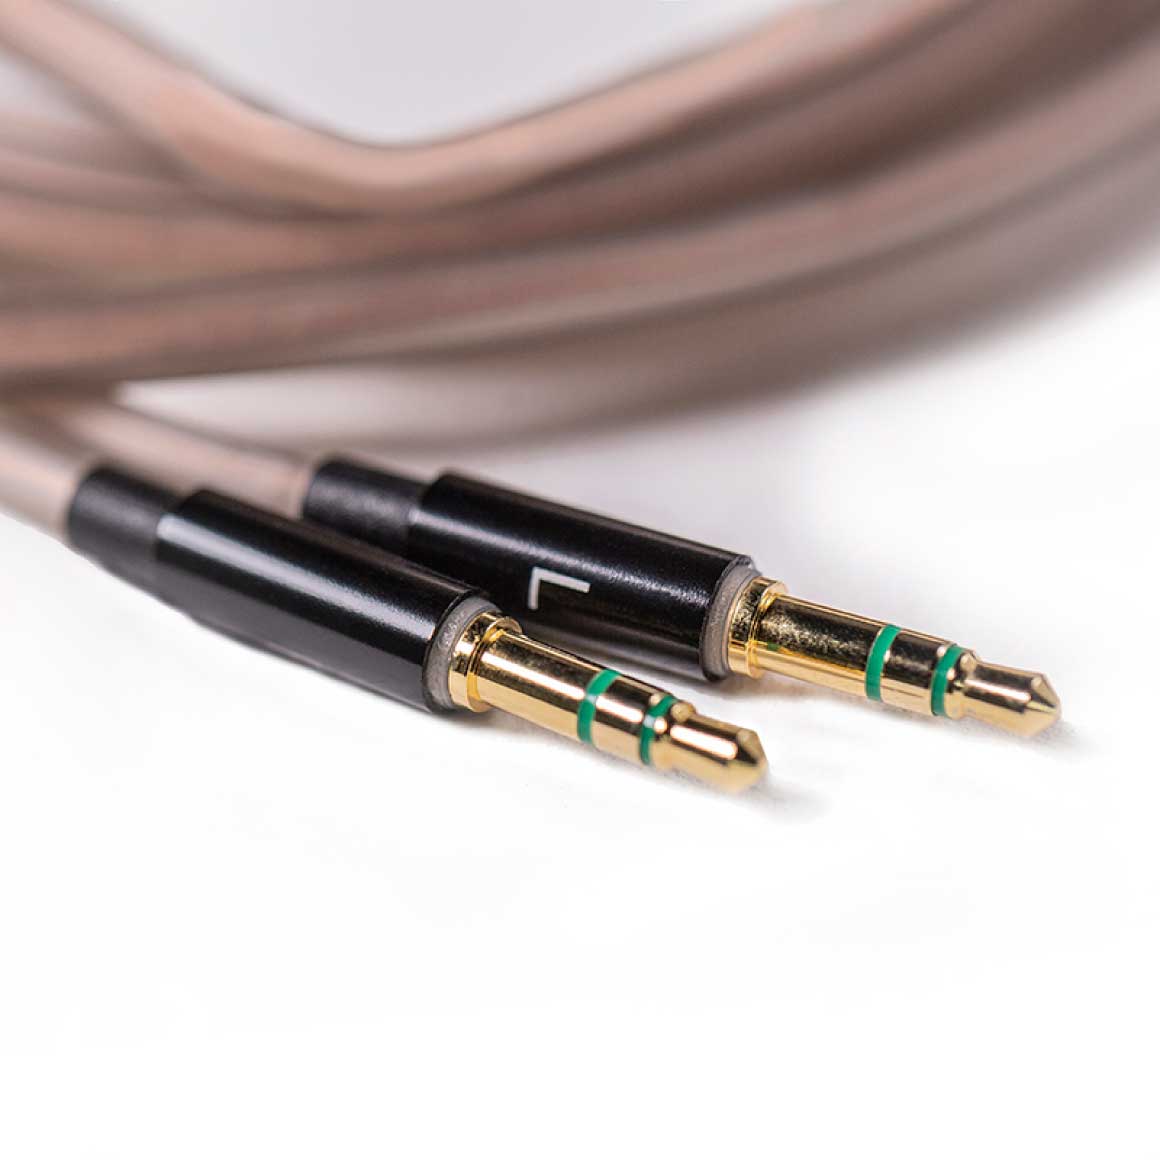 HiFiMAN - 3.5mm to 4.4mm Balanced Cable (Unboxed)